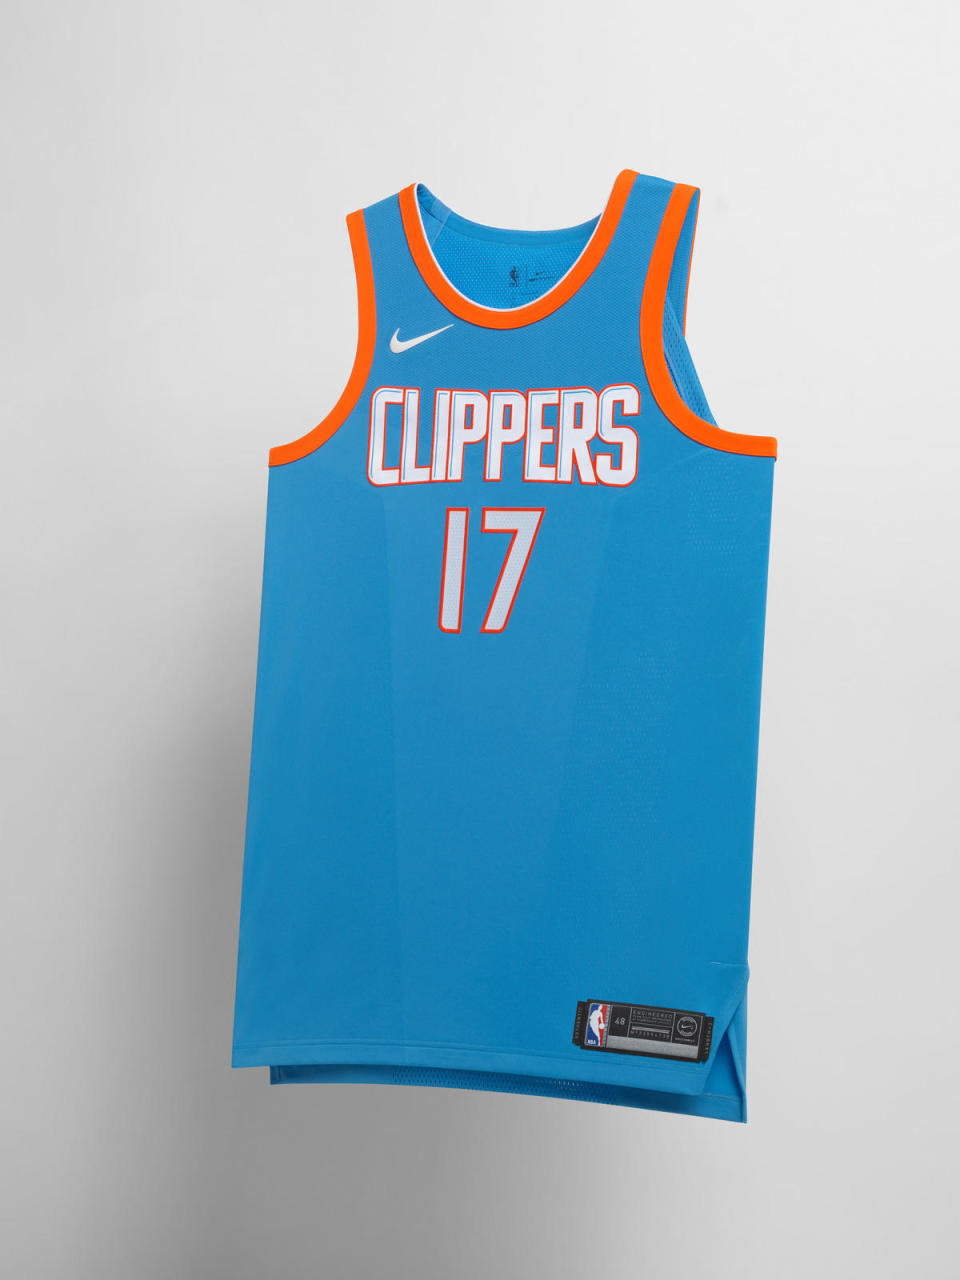 Los Angeles Clippers City uniform. (Nike)